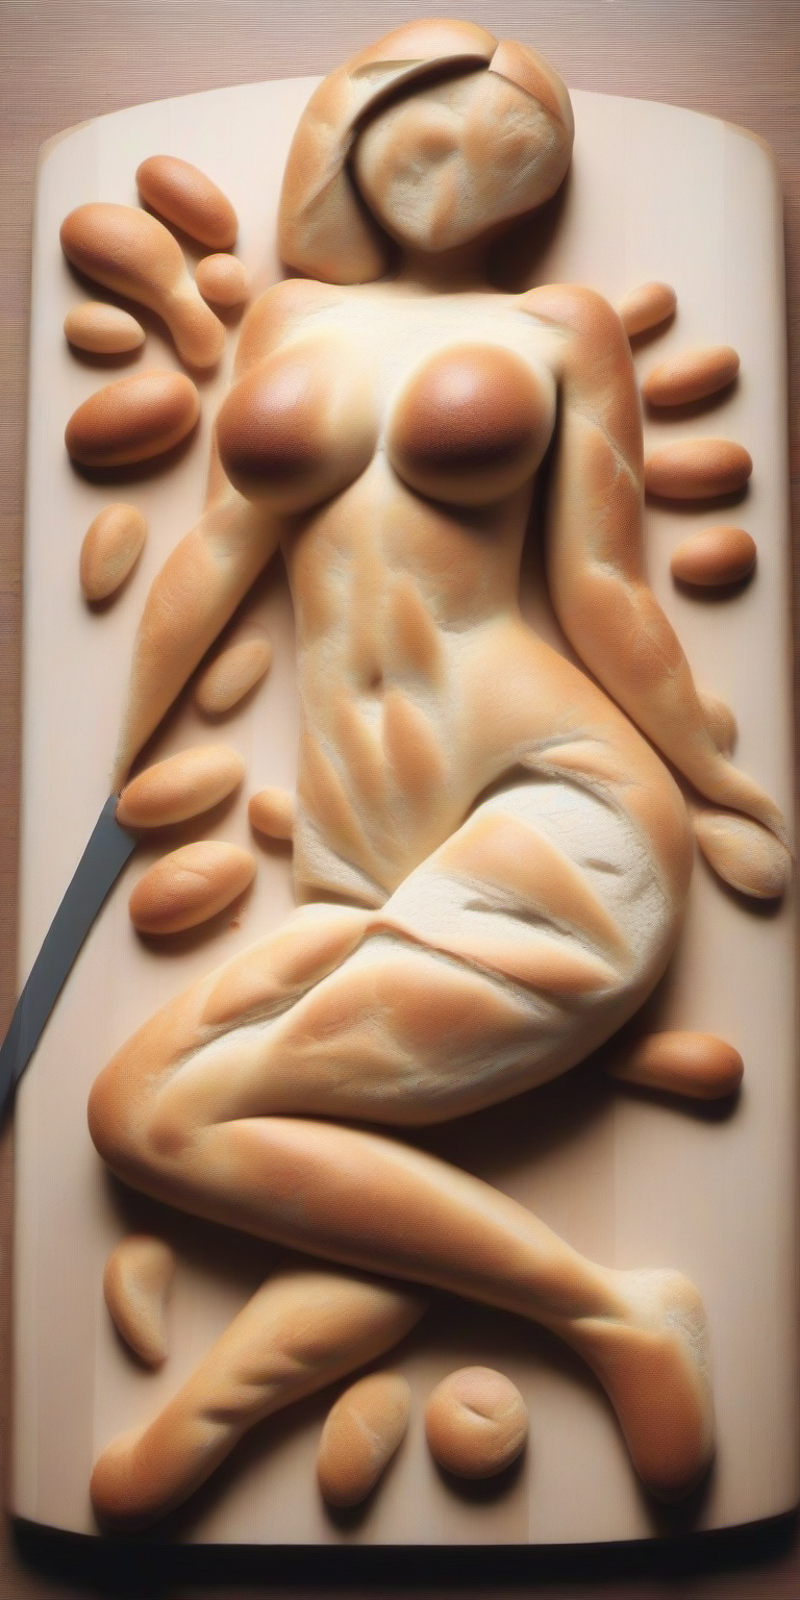 Artistic Bread Shape: A Naked Woman Lying on a Table